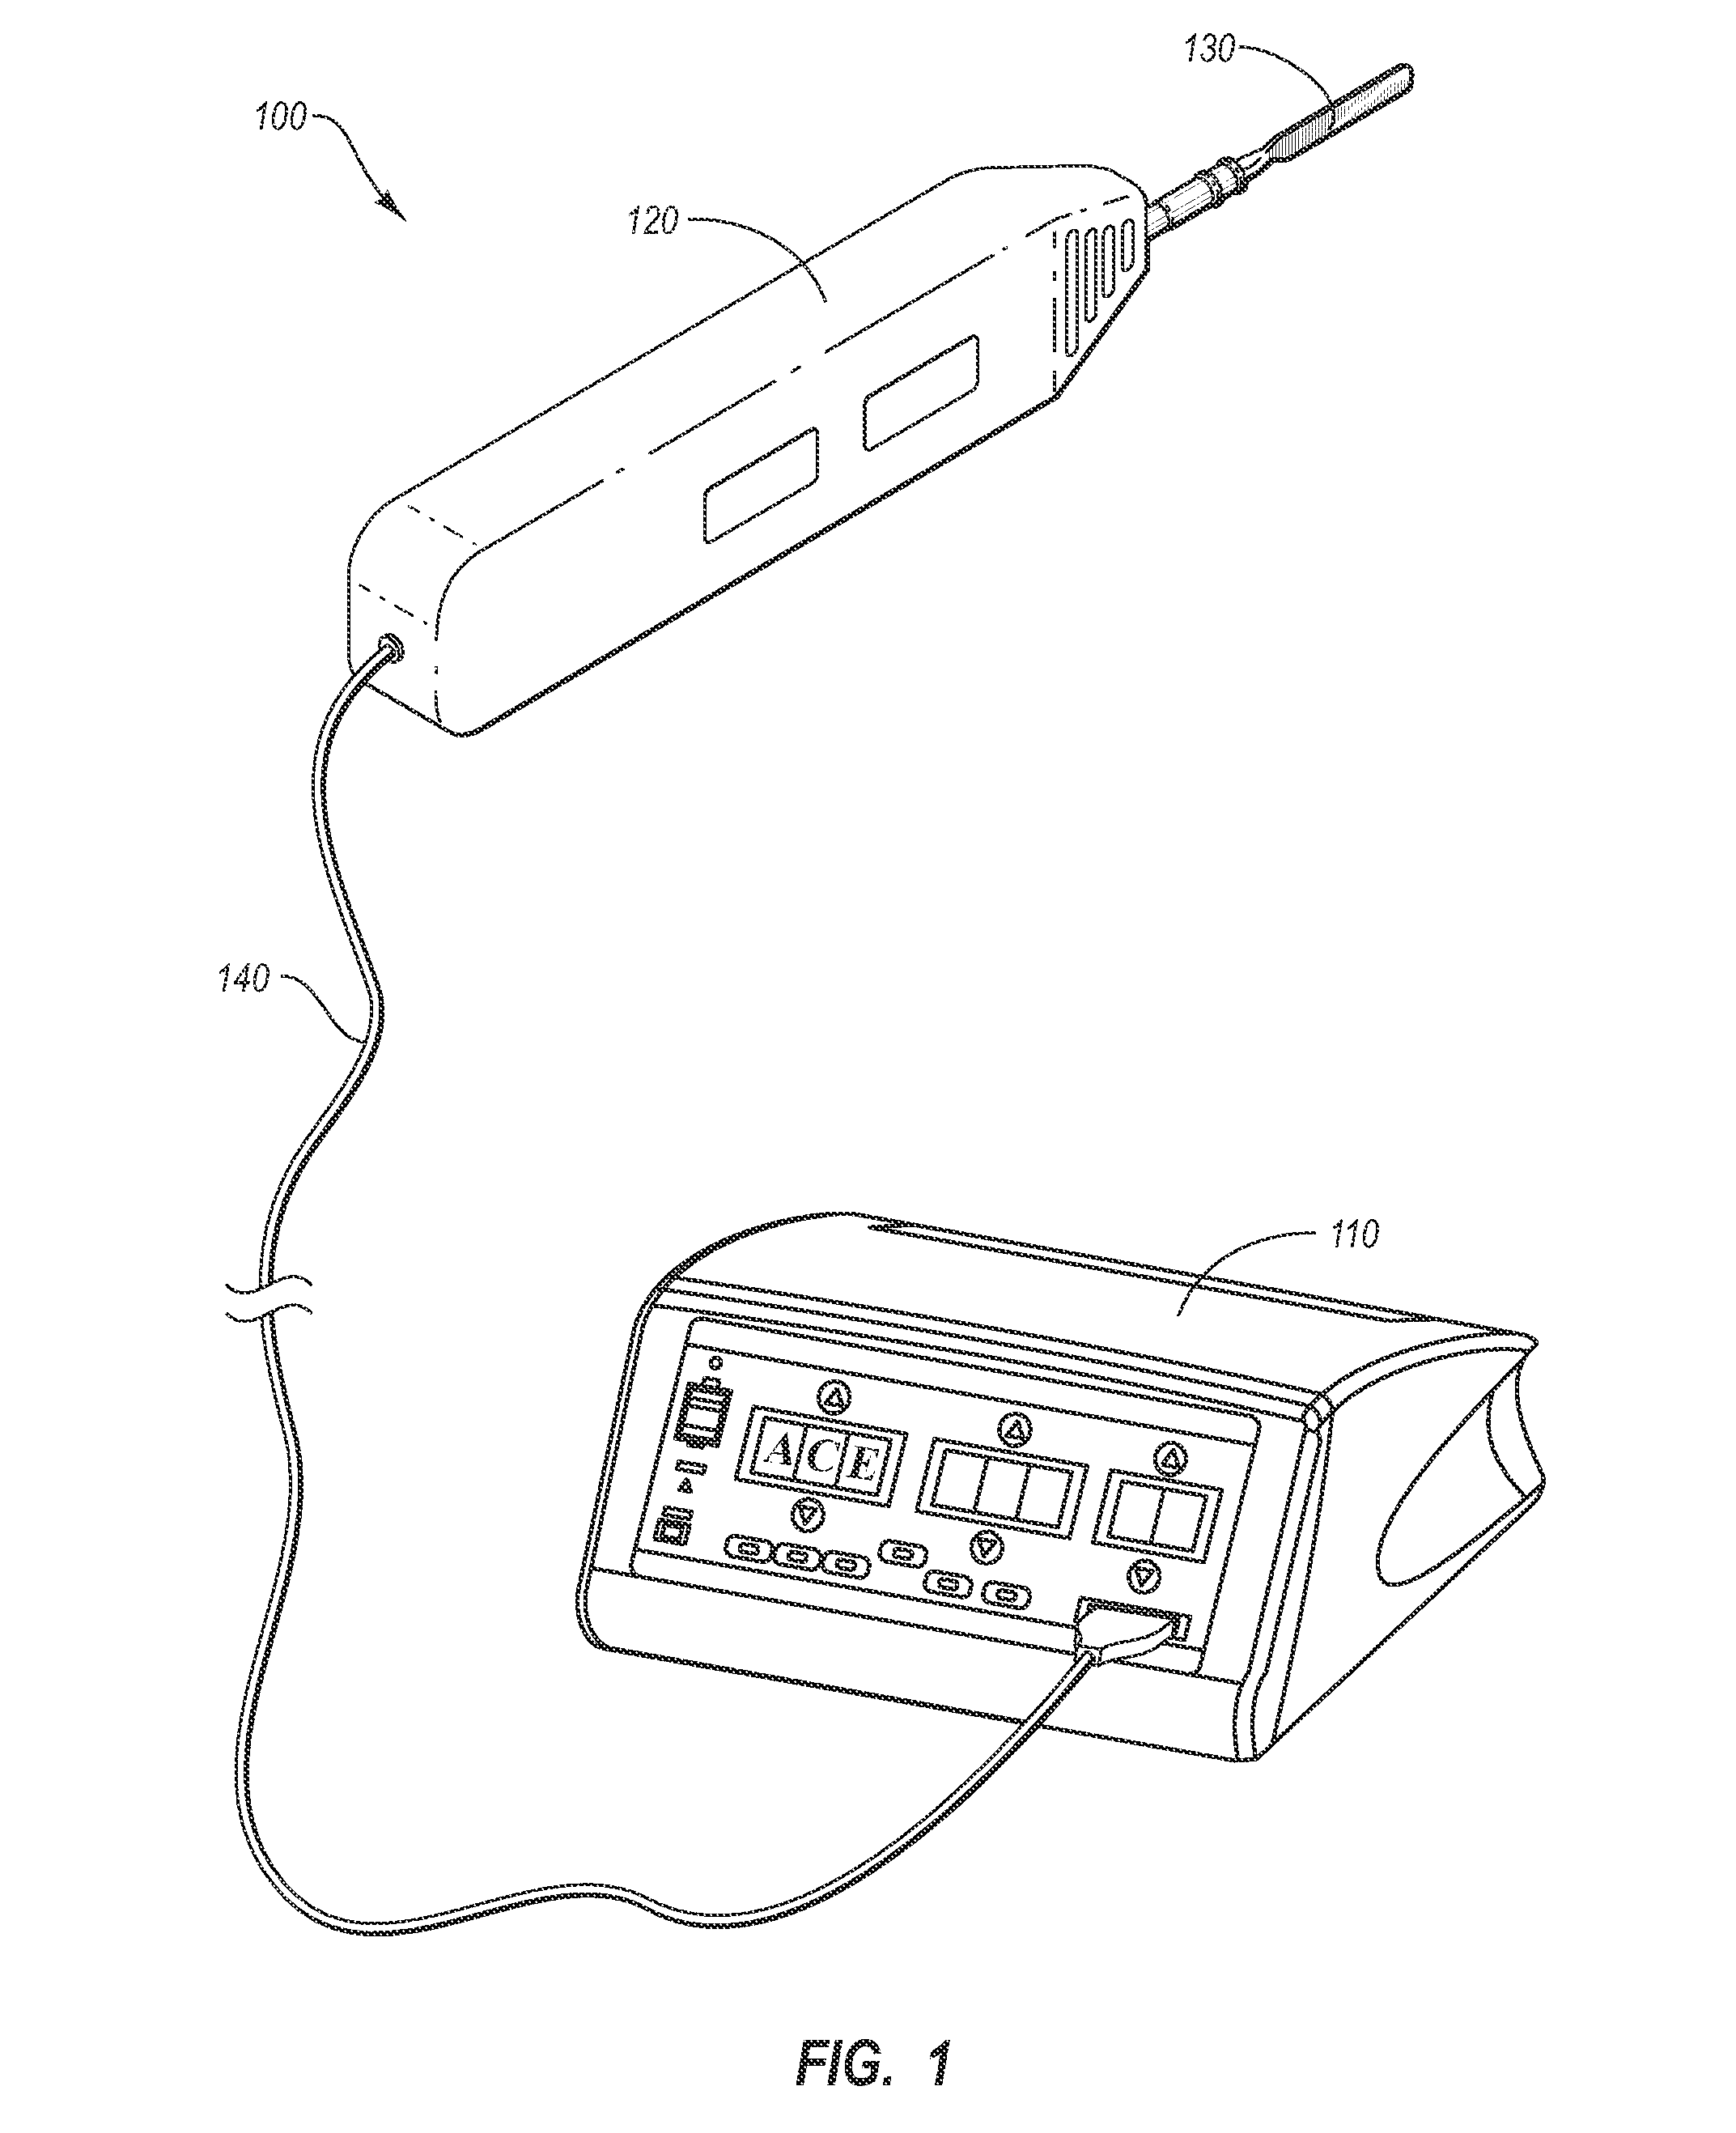 Methods, systems, and devices for performing electrosurgical procedures